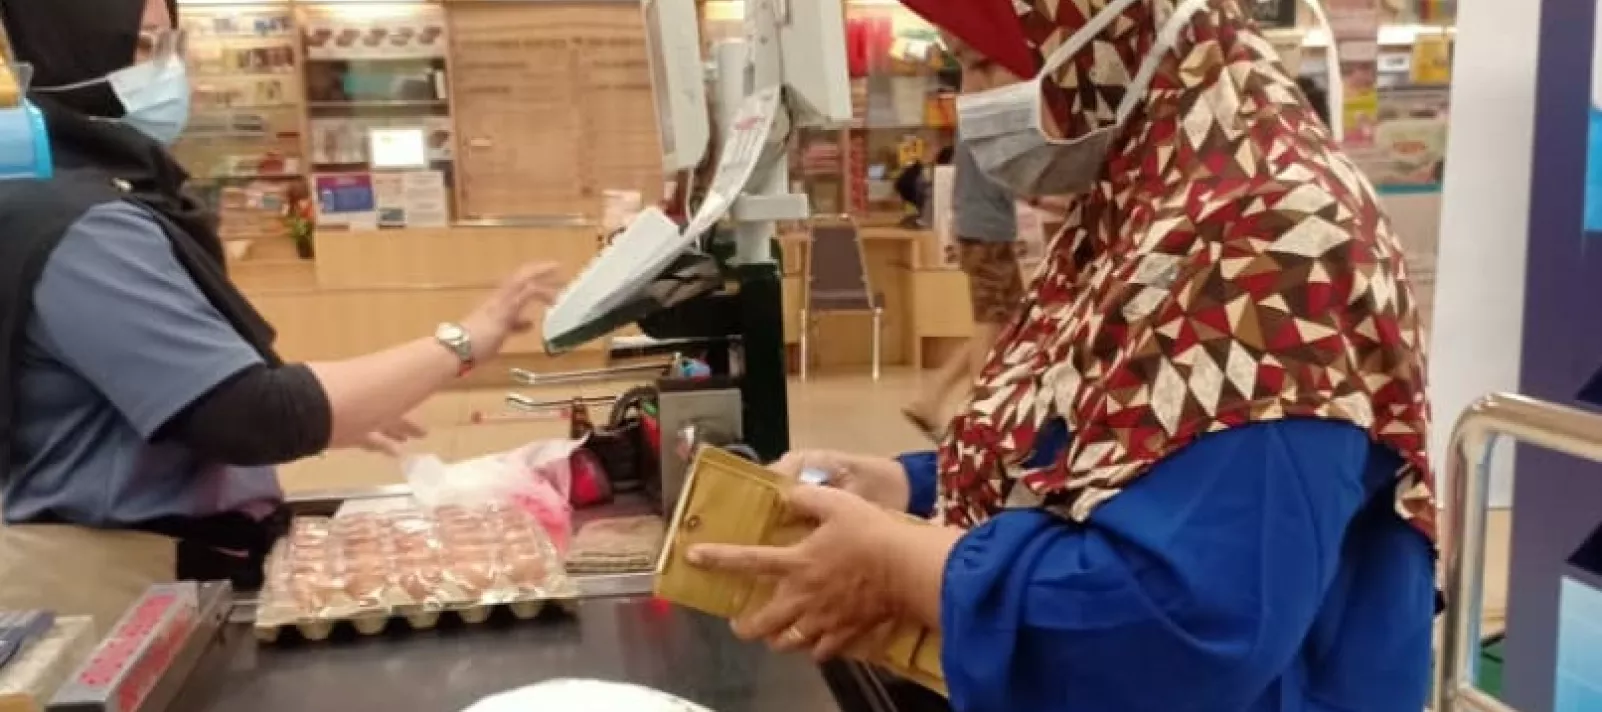 Woman paying for groceries at supermarket